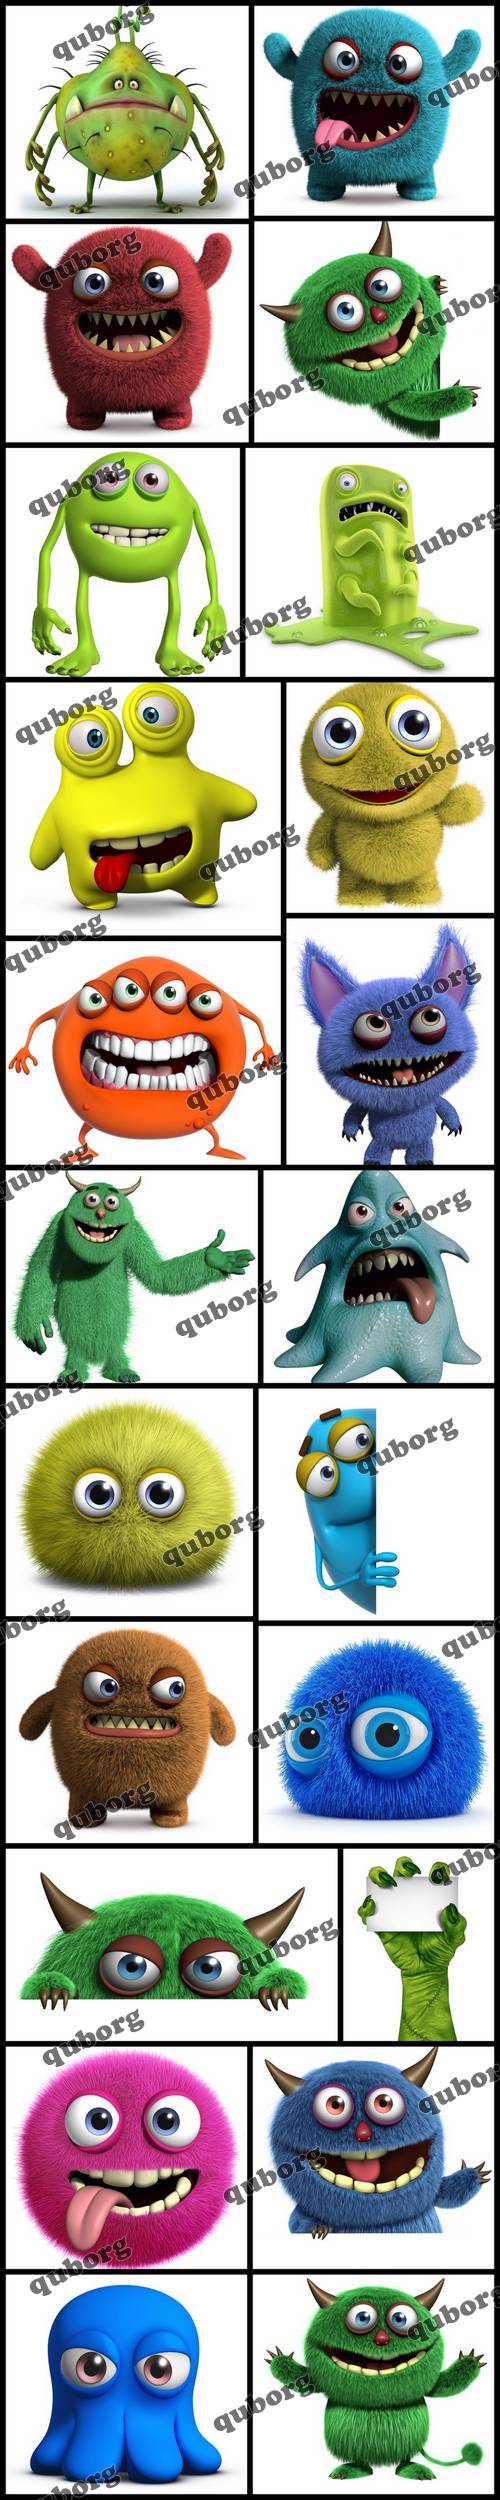 Stock Photos - 3D Monsters